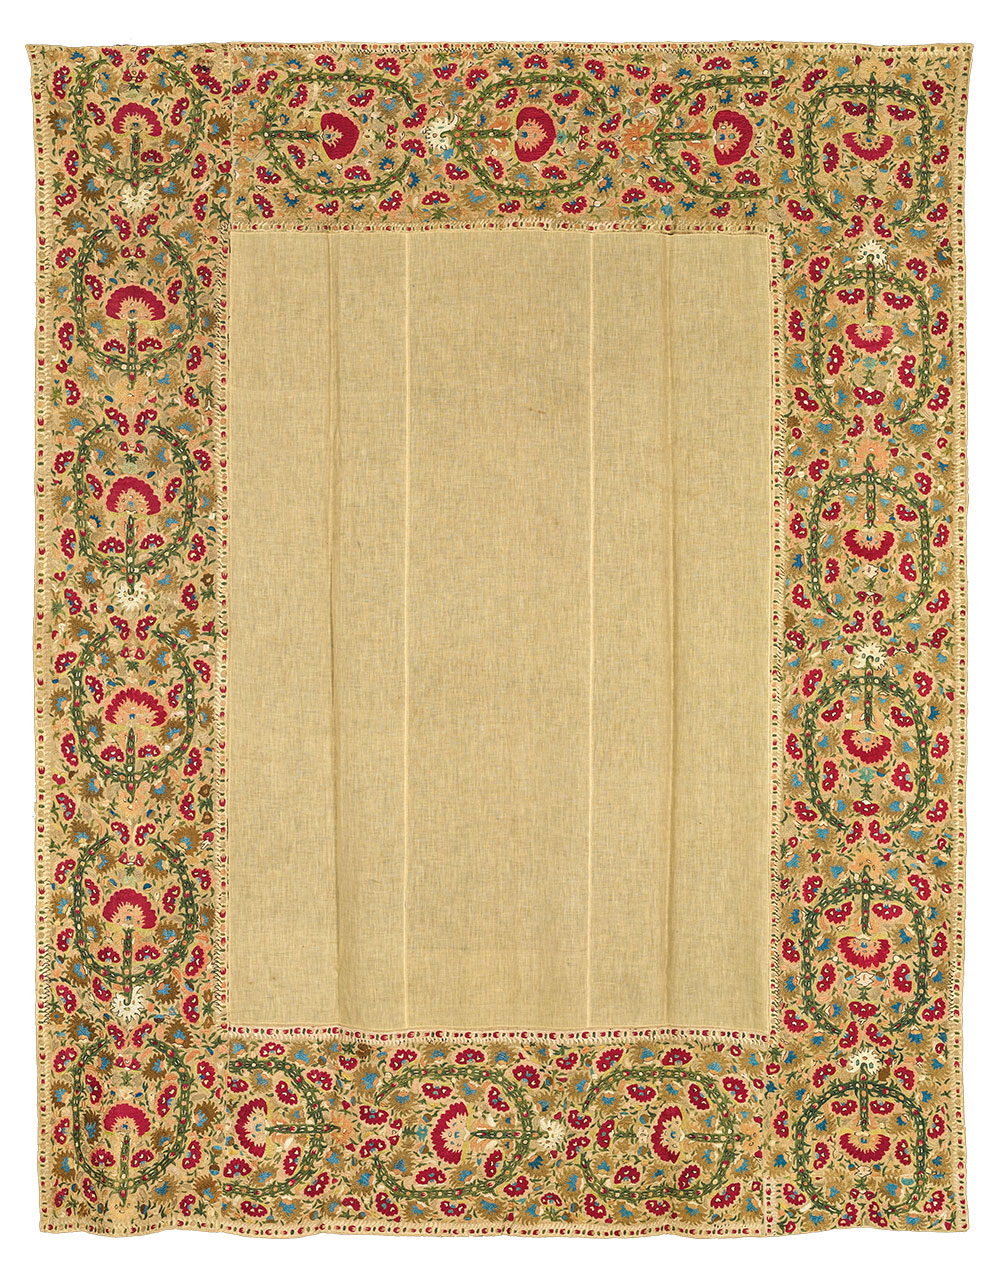 (6) Bedspread, probably Ioannina, Epirus, 18th century. Silk on linen, 1.82 x 2.18 m (5' 11" x 7' 2"). Ashmolean Museum of Art and Archaeology, University of Oxford, EA1989.211, Presented by John Buxton, 1989